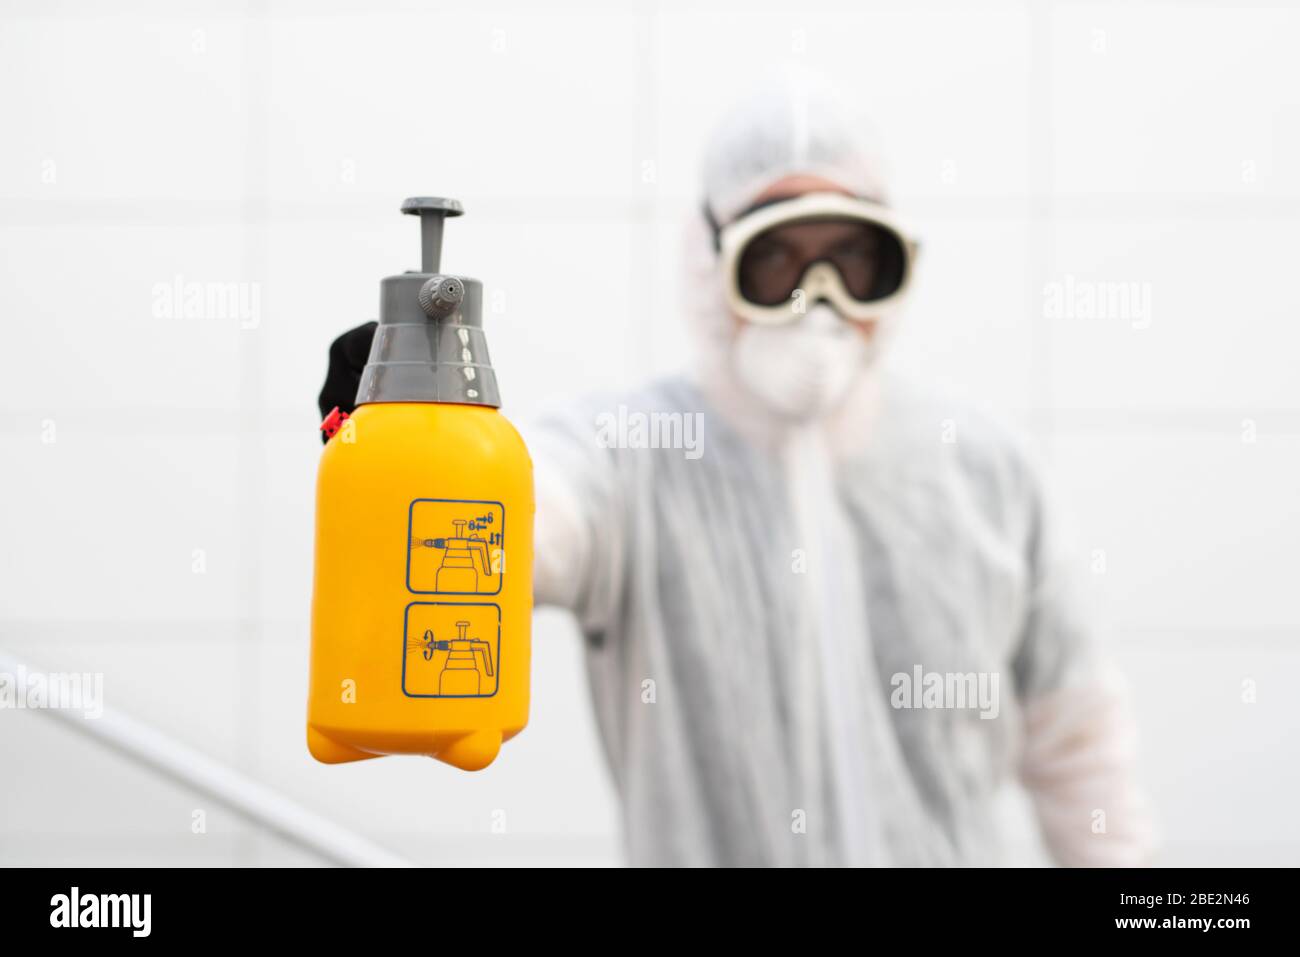 A man disinfects public spaces at the time of the corona crisis Stock Photo